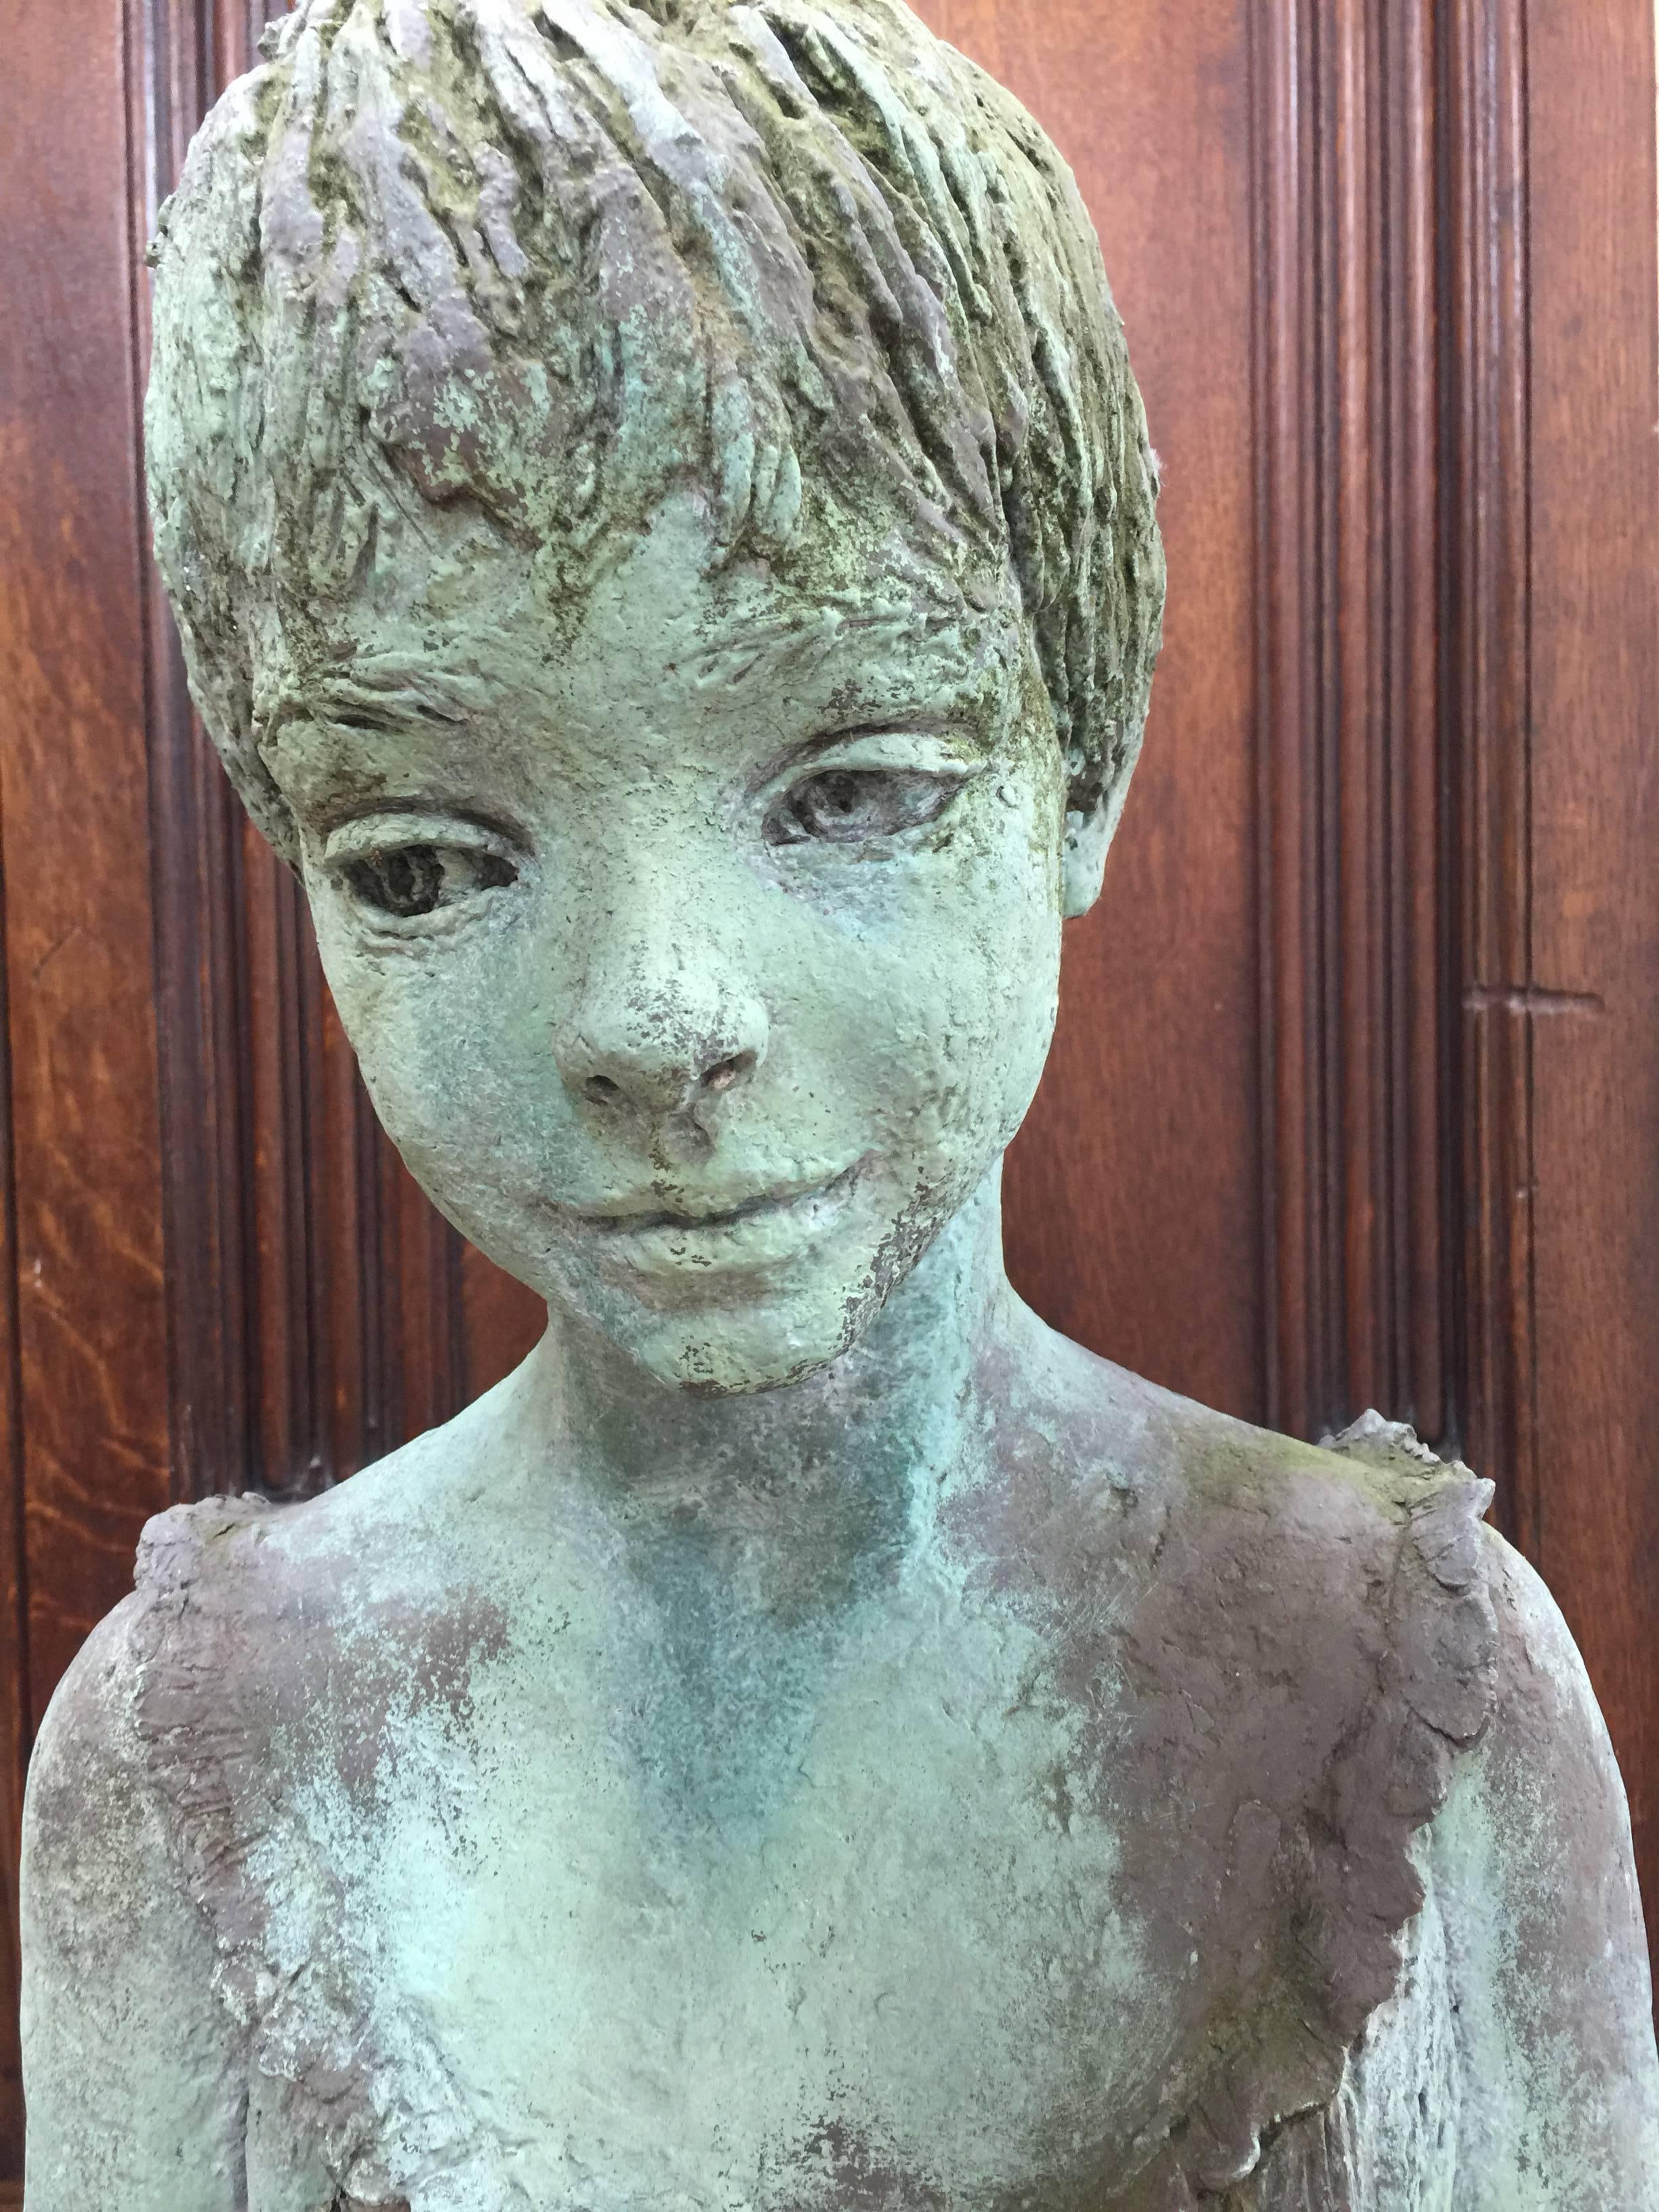 English Bronze Resin figure titled 'Eefa', who was a young Irish Girl  - Sculpture by Marion Smith